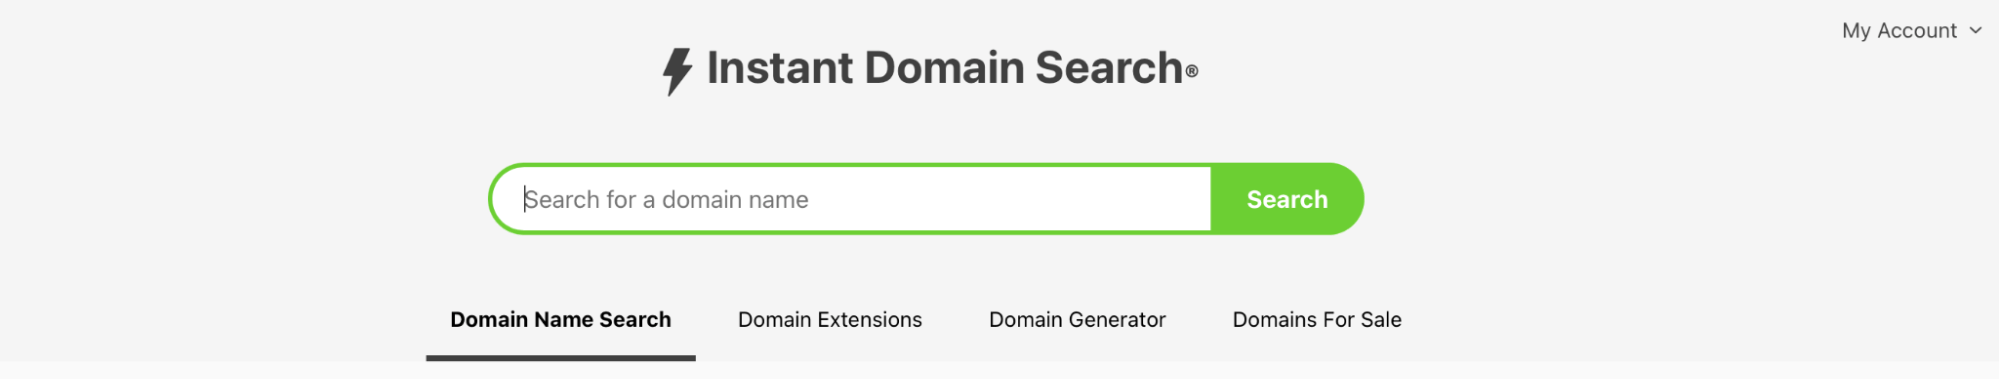 Instant Domain Search tool